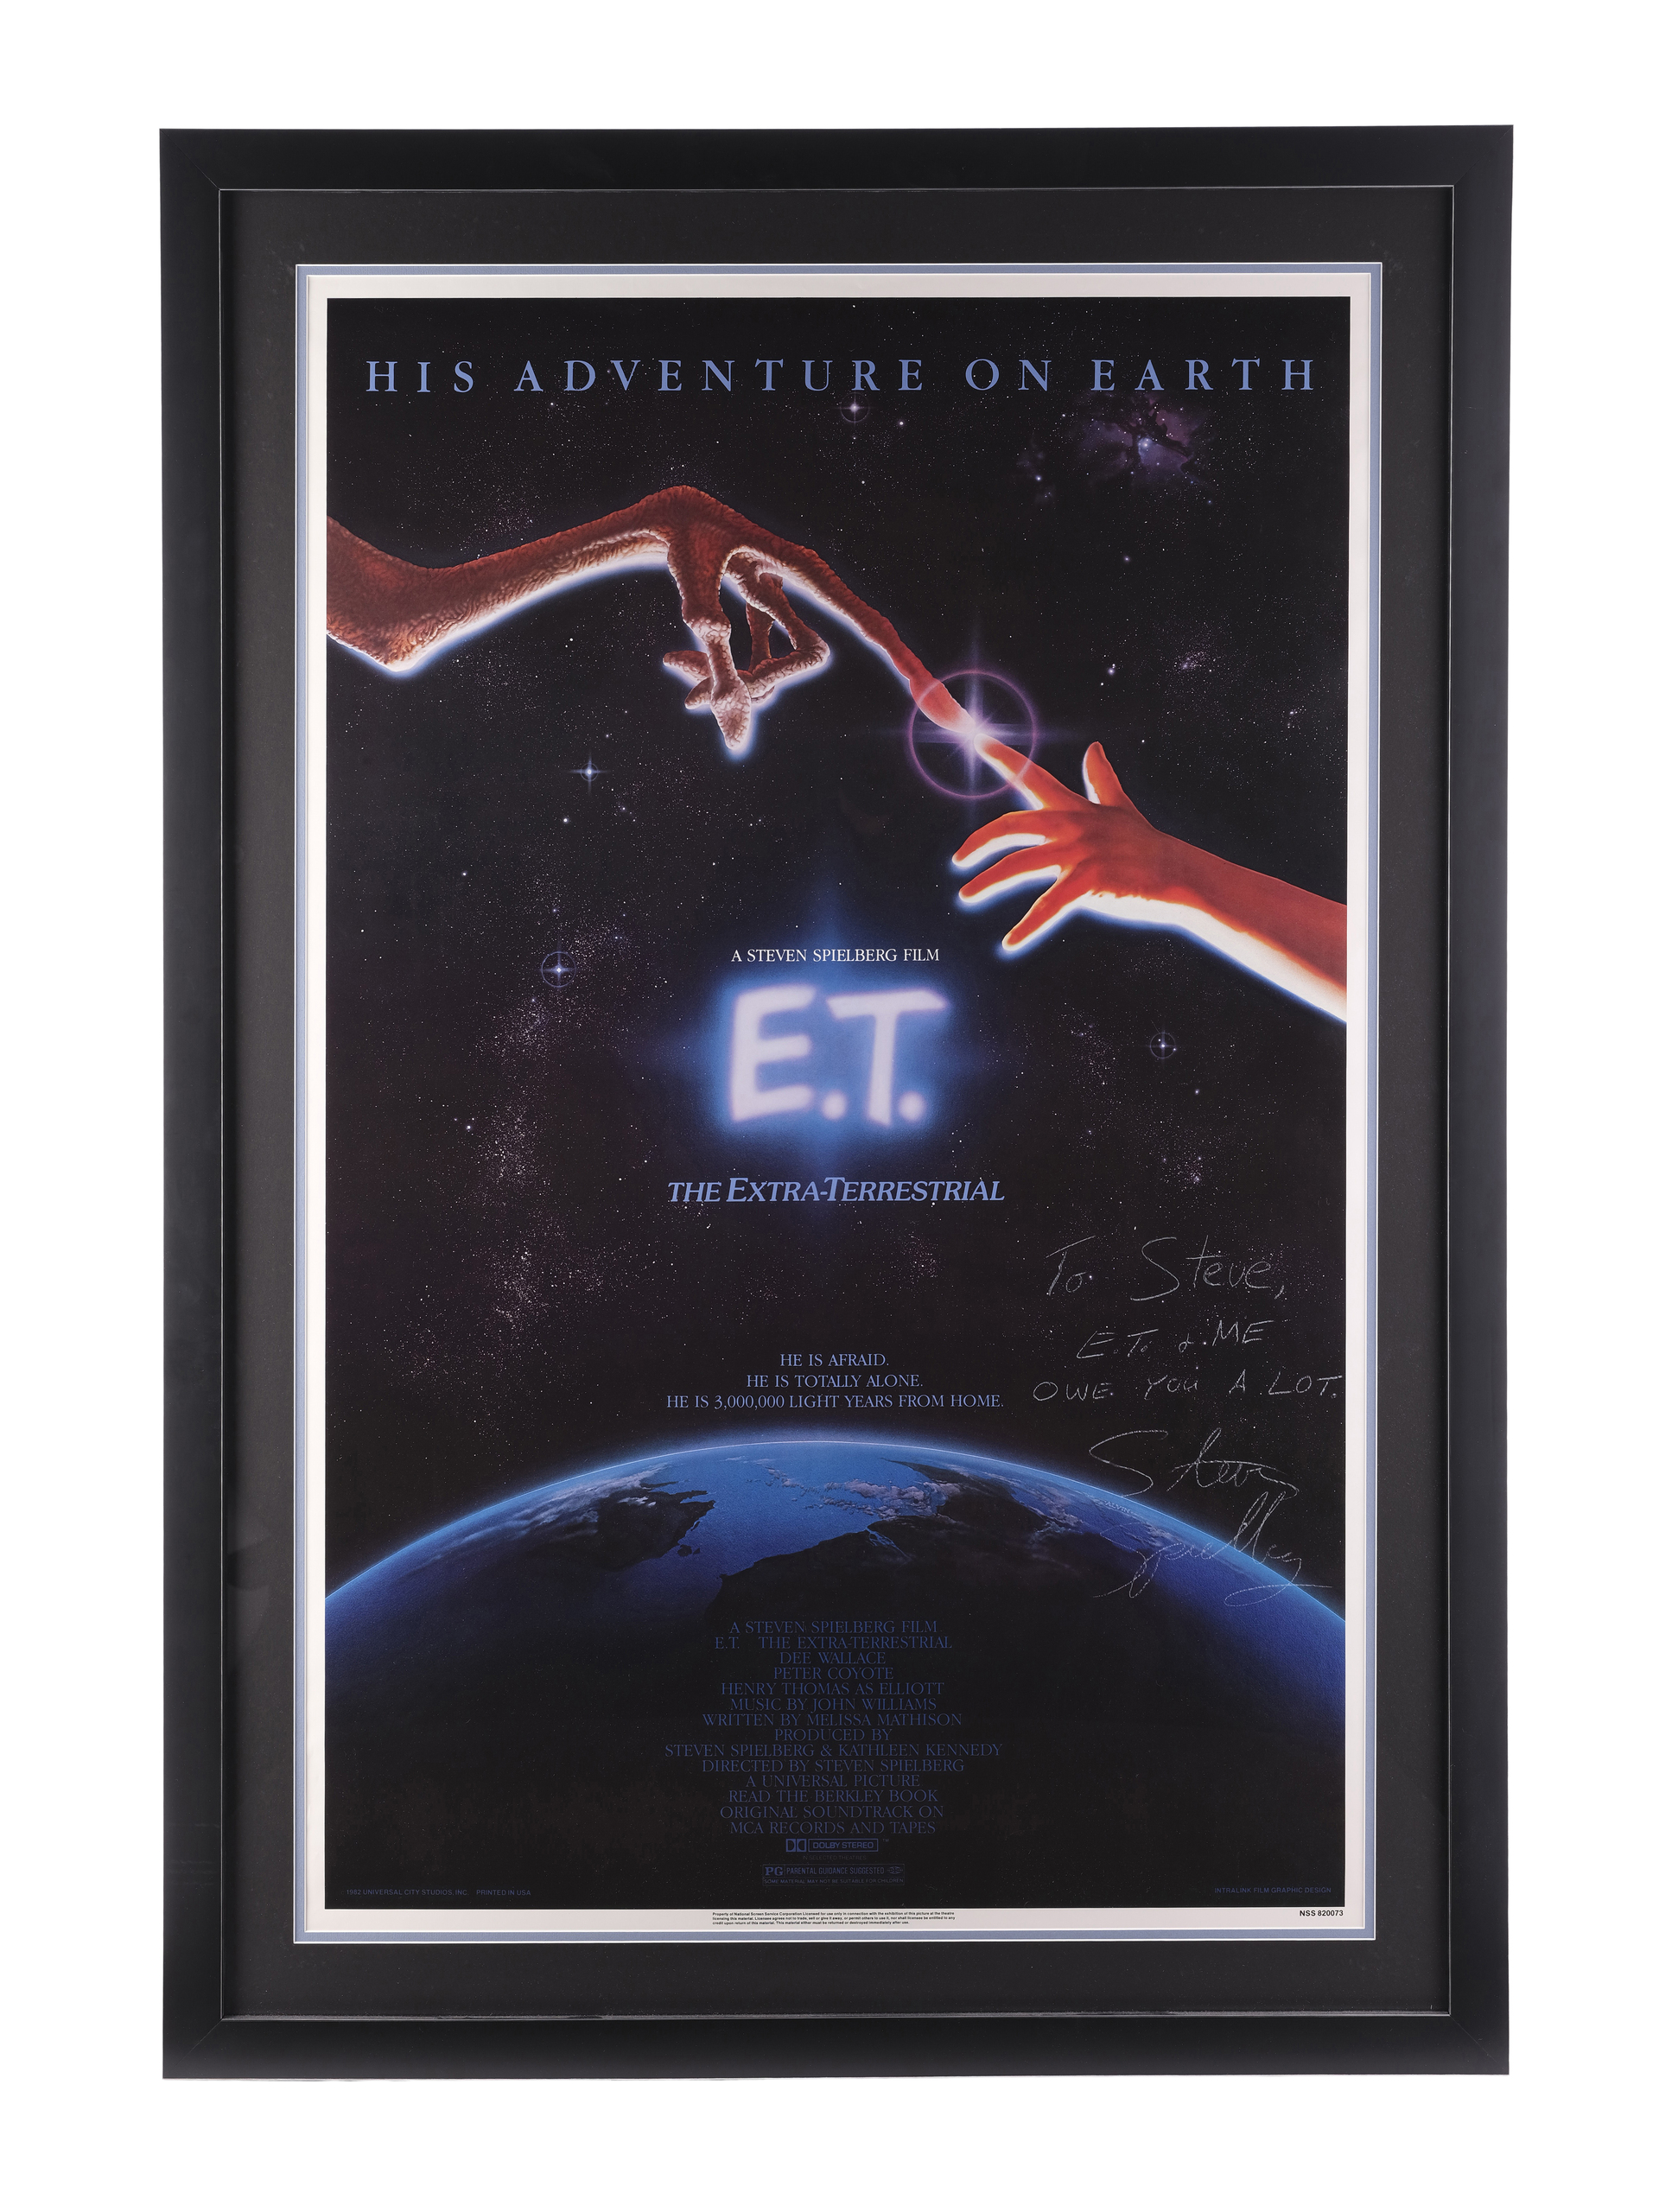 E.T. THE EXTRA-TERRESTRIAL (1982) - Framed Steven Spielberg-Autographed "Touching Fingers" One-Sheet